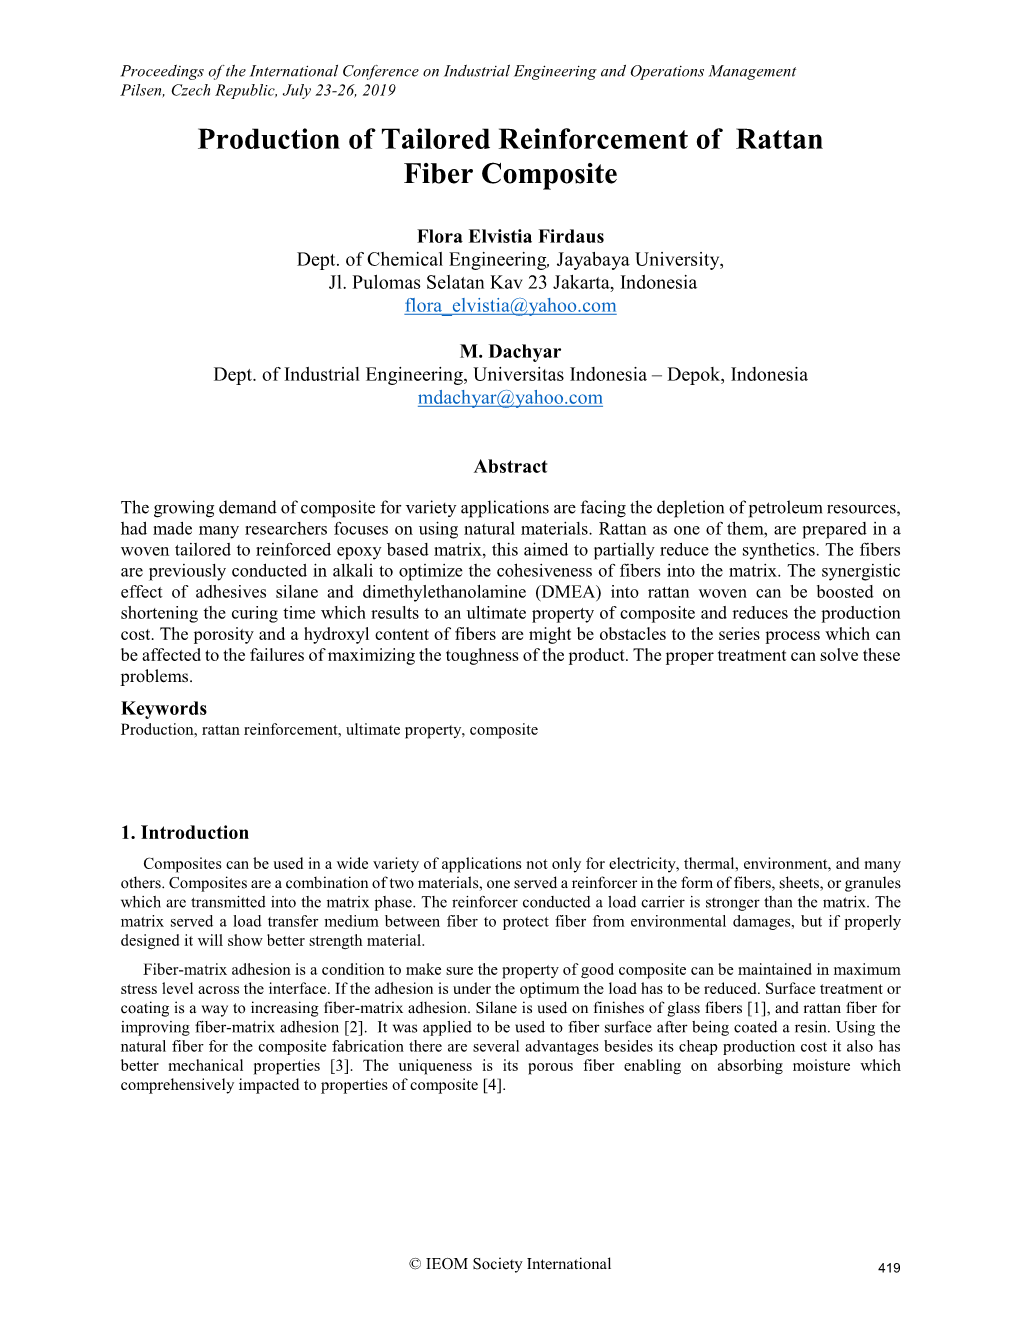 Production of Tailored Reinforcement of Rattan Fiber Composite